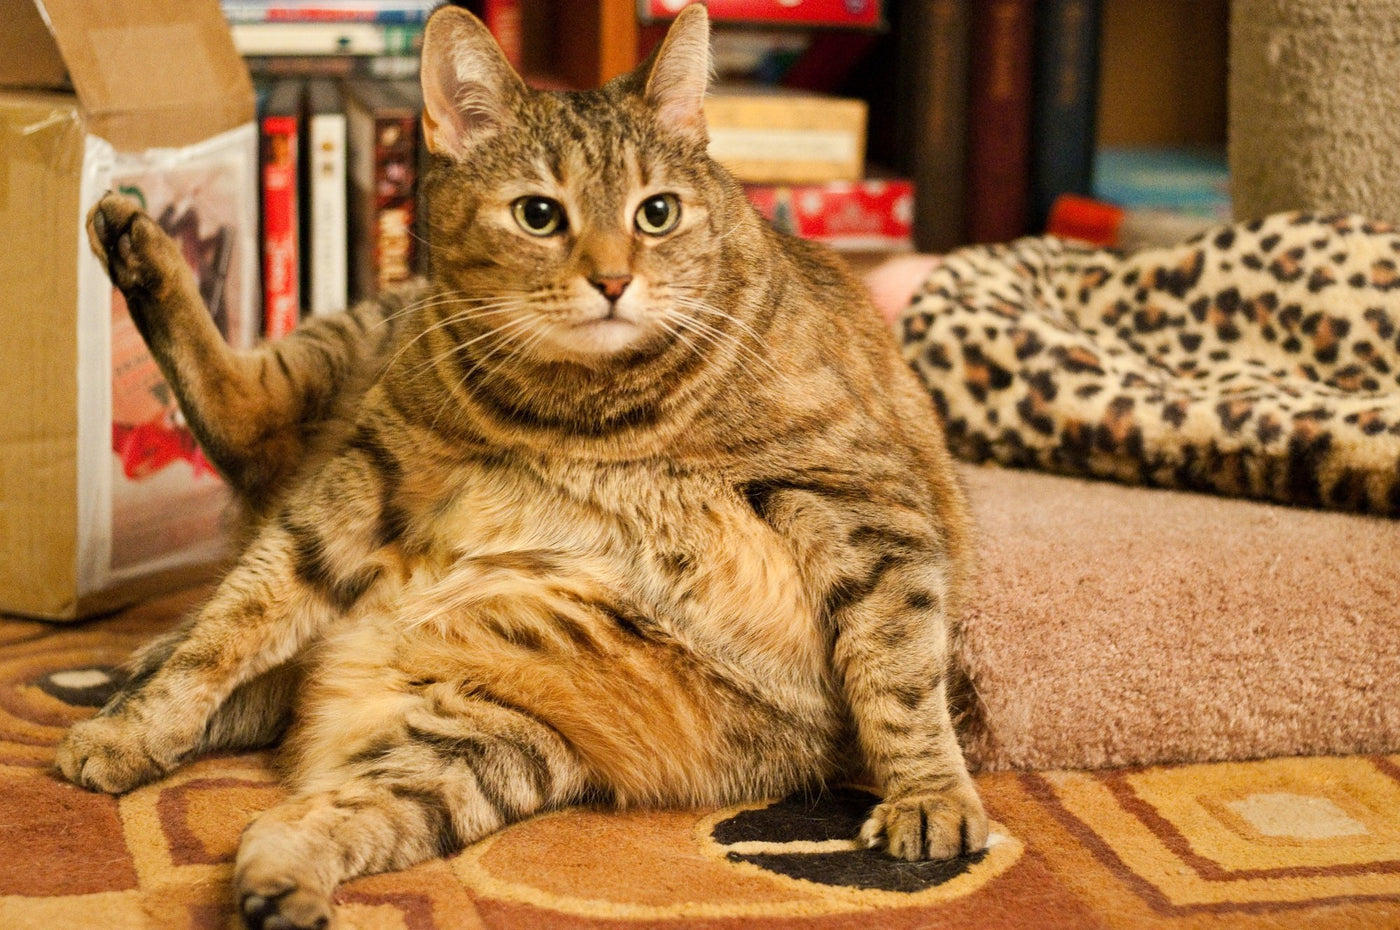 A Guide Through Feline Obesity: Is Your Cat 'Just Fluffy' Or Overweight?